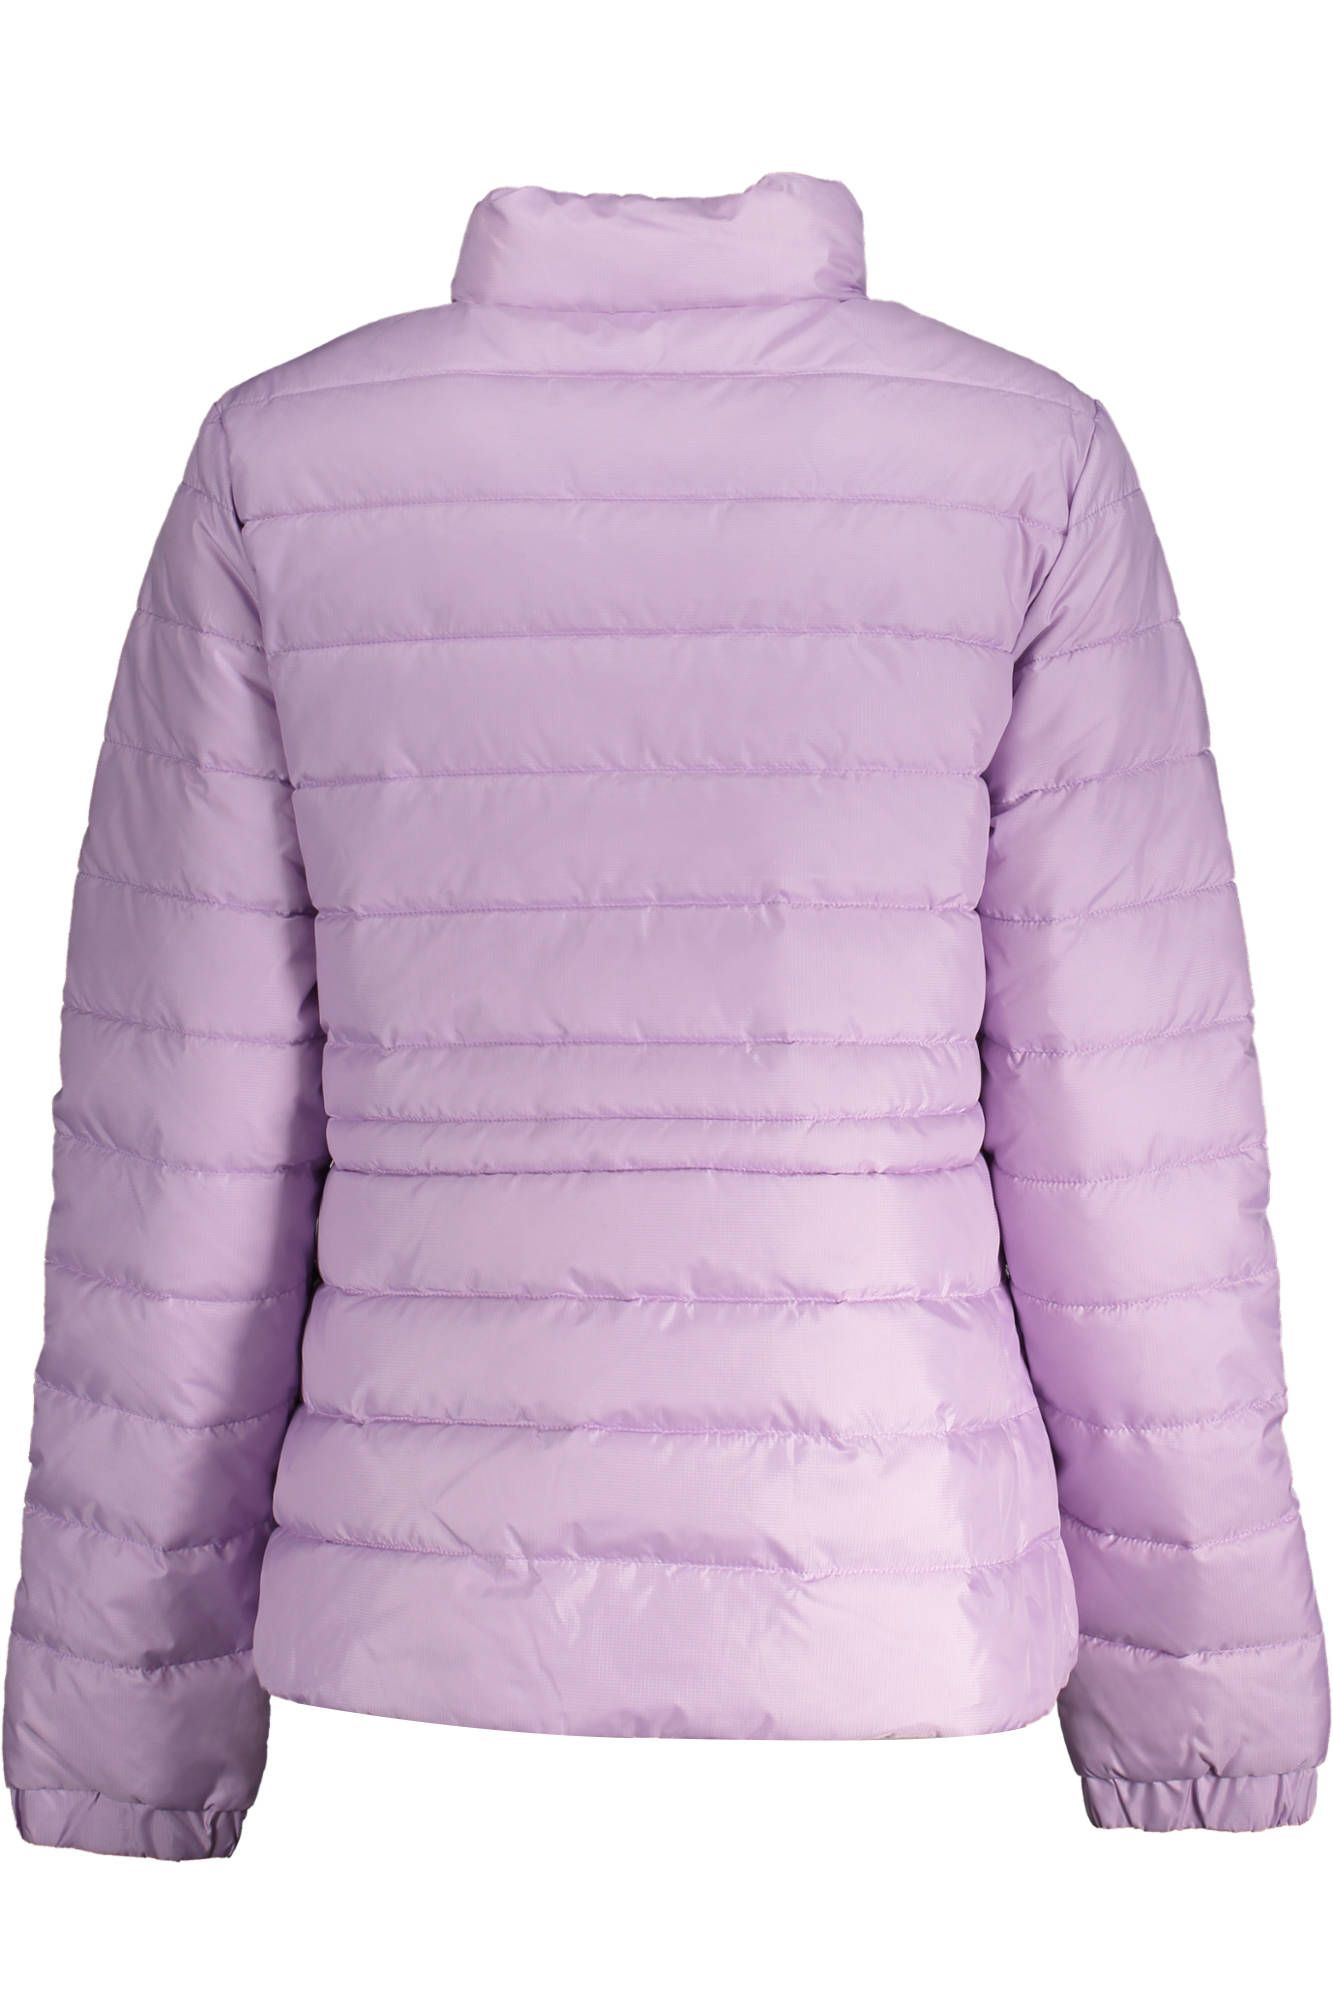 Chic Pink Water-Resistant Jacket